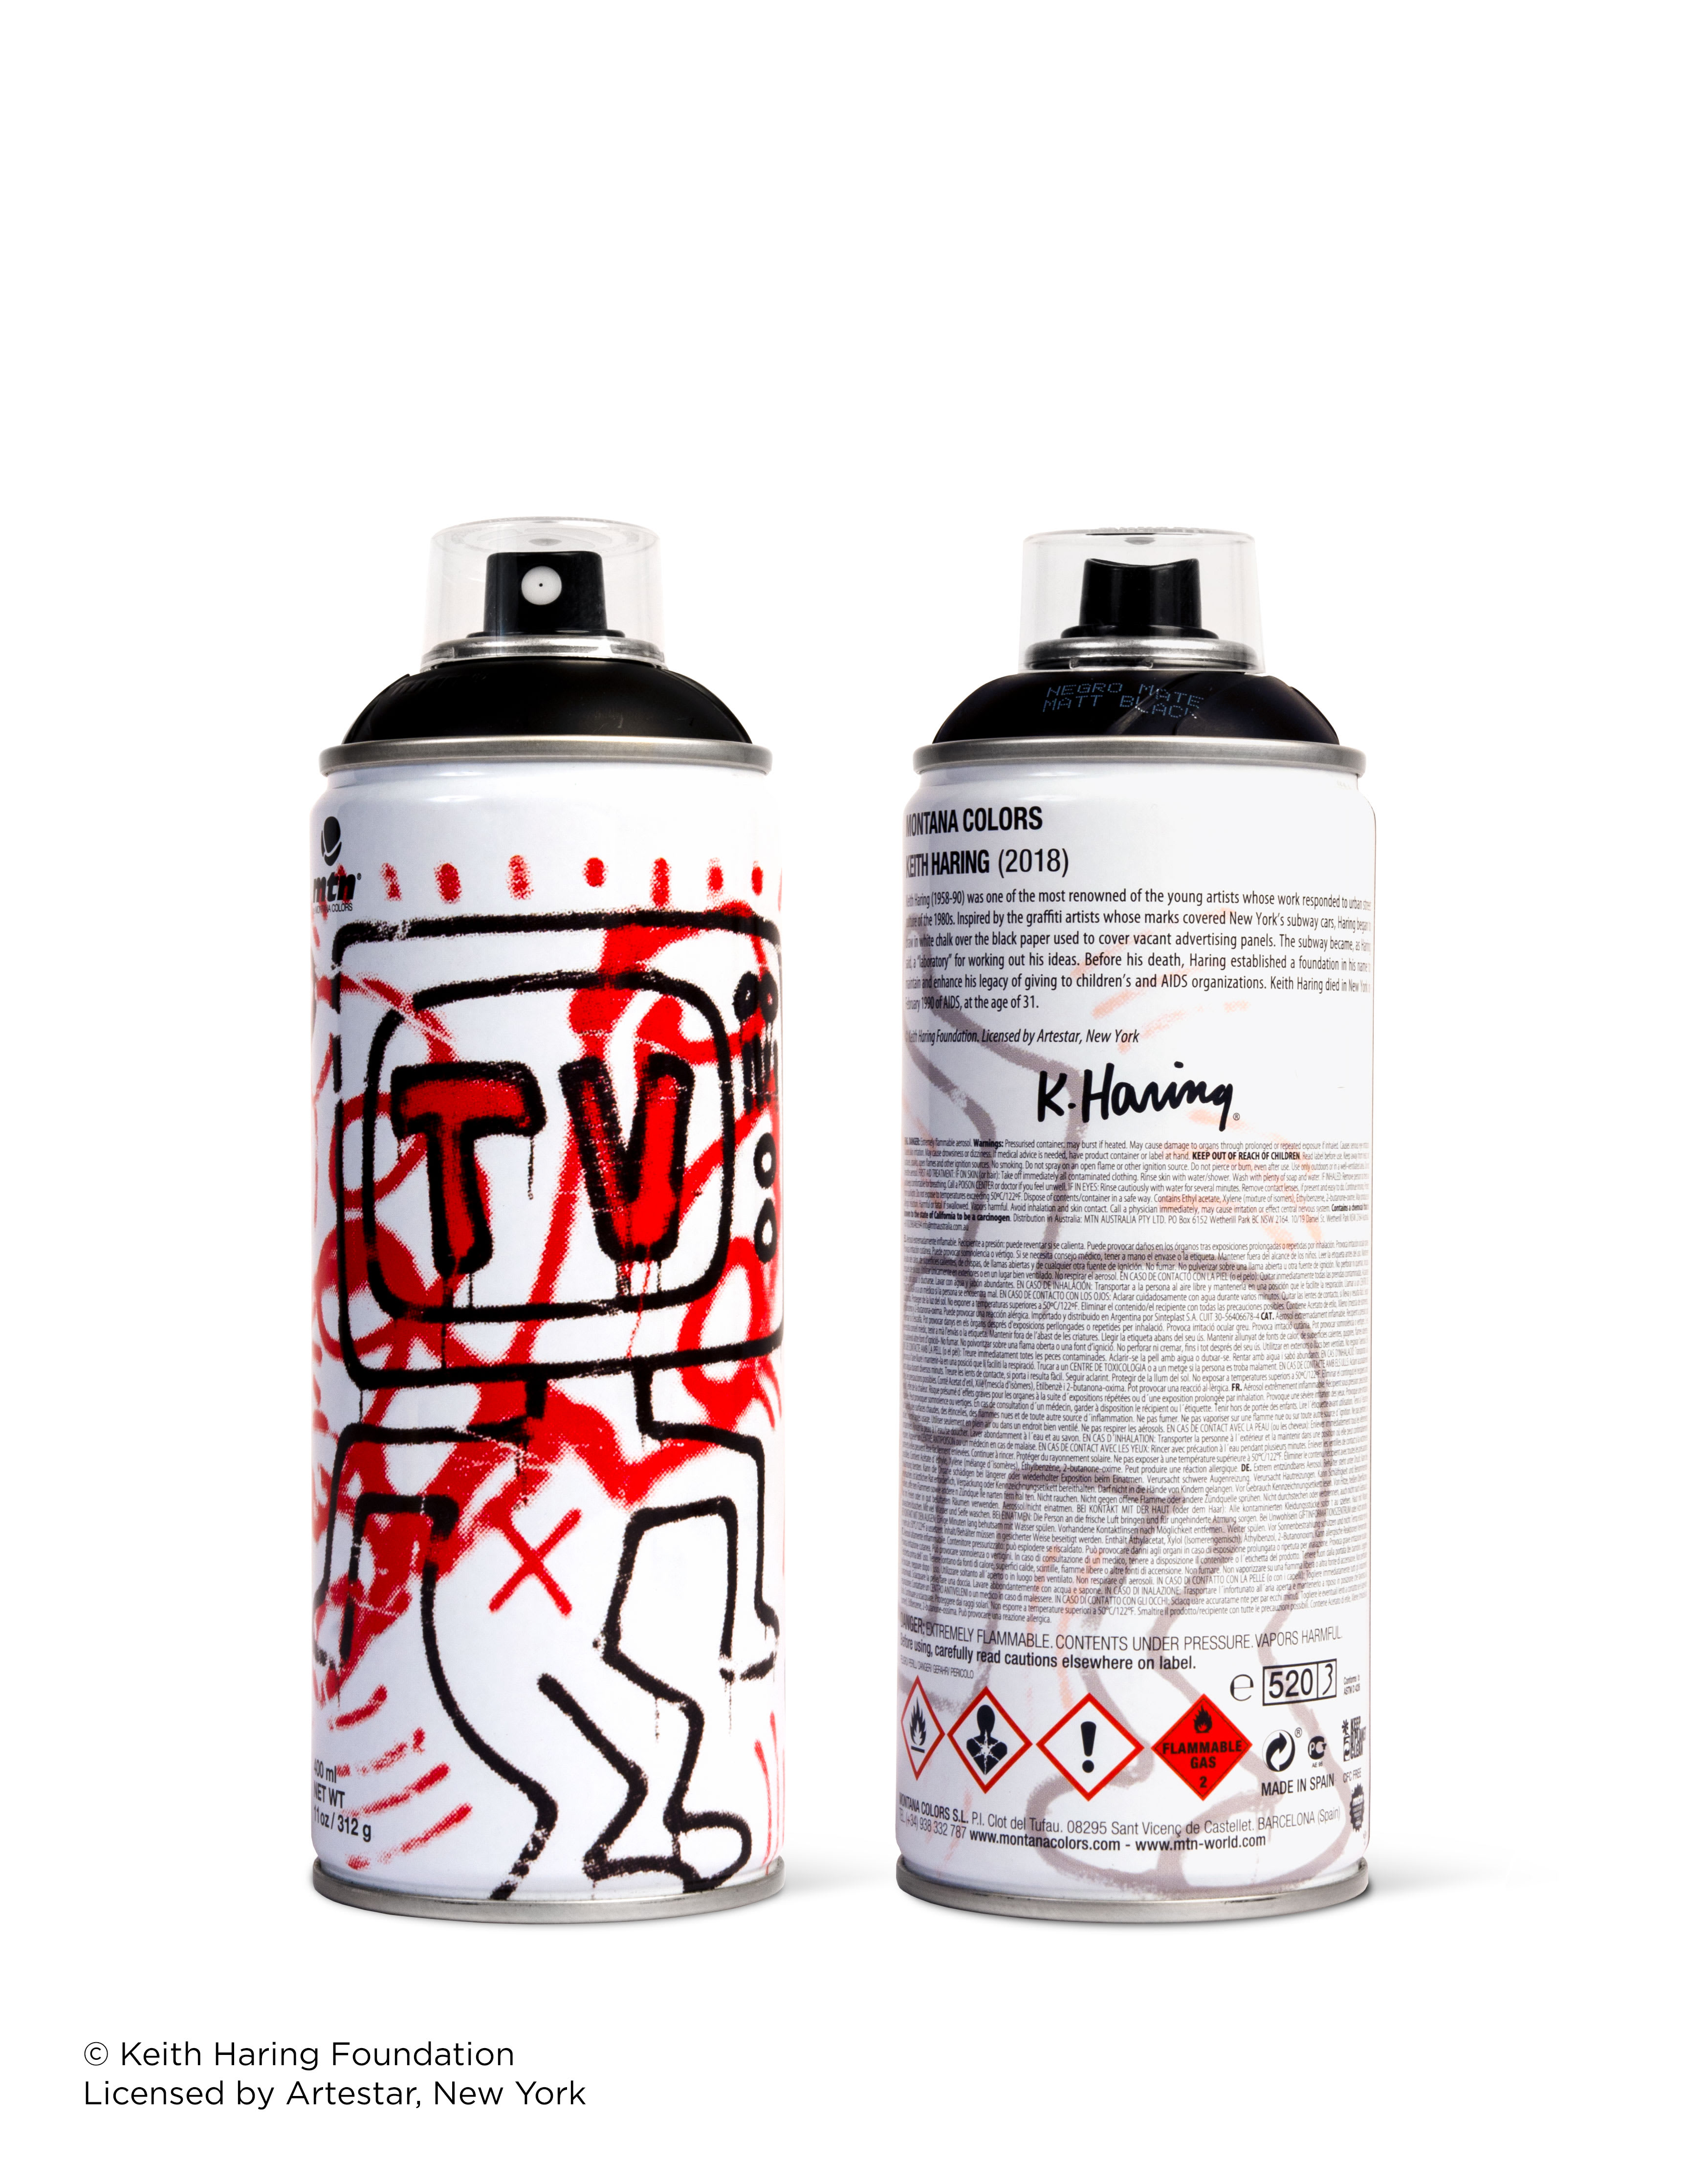 Black Keith Haring spray paint can for Beyond The Streets.